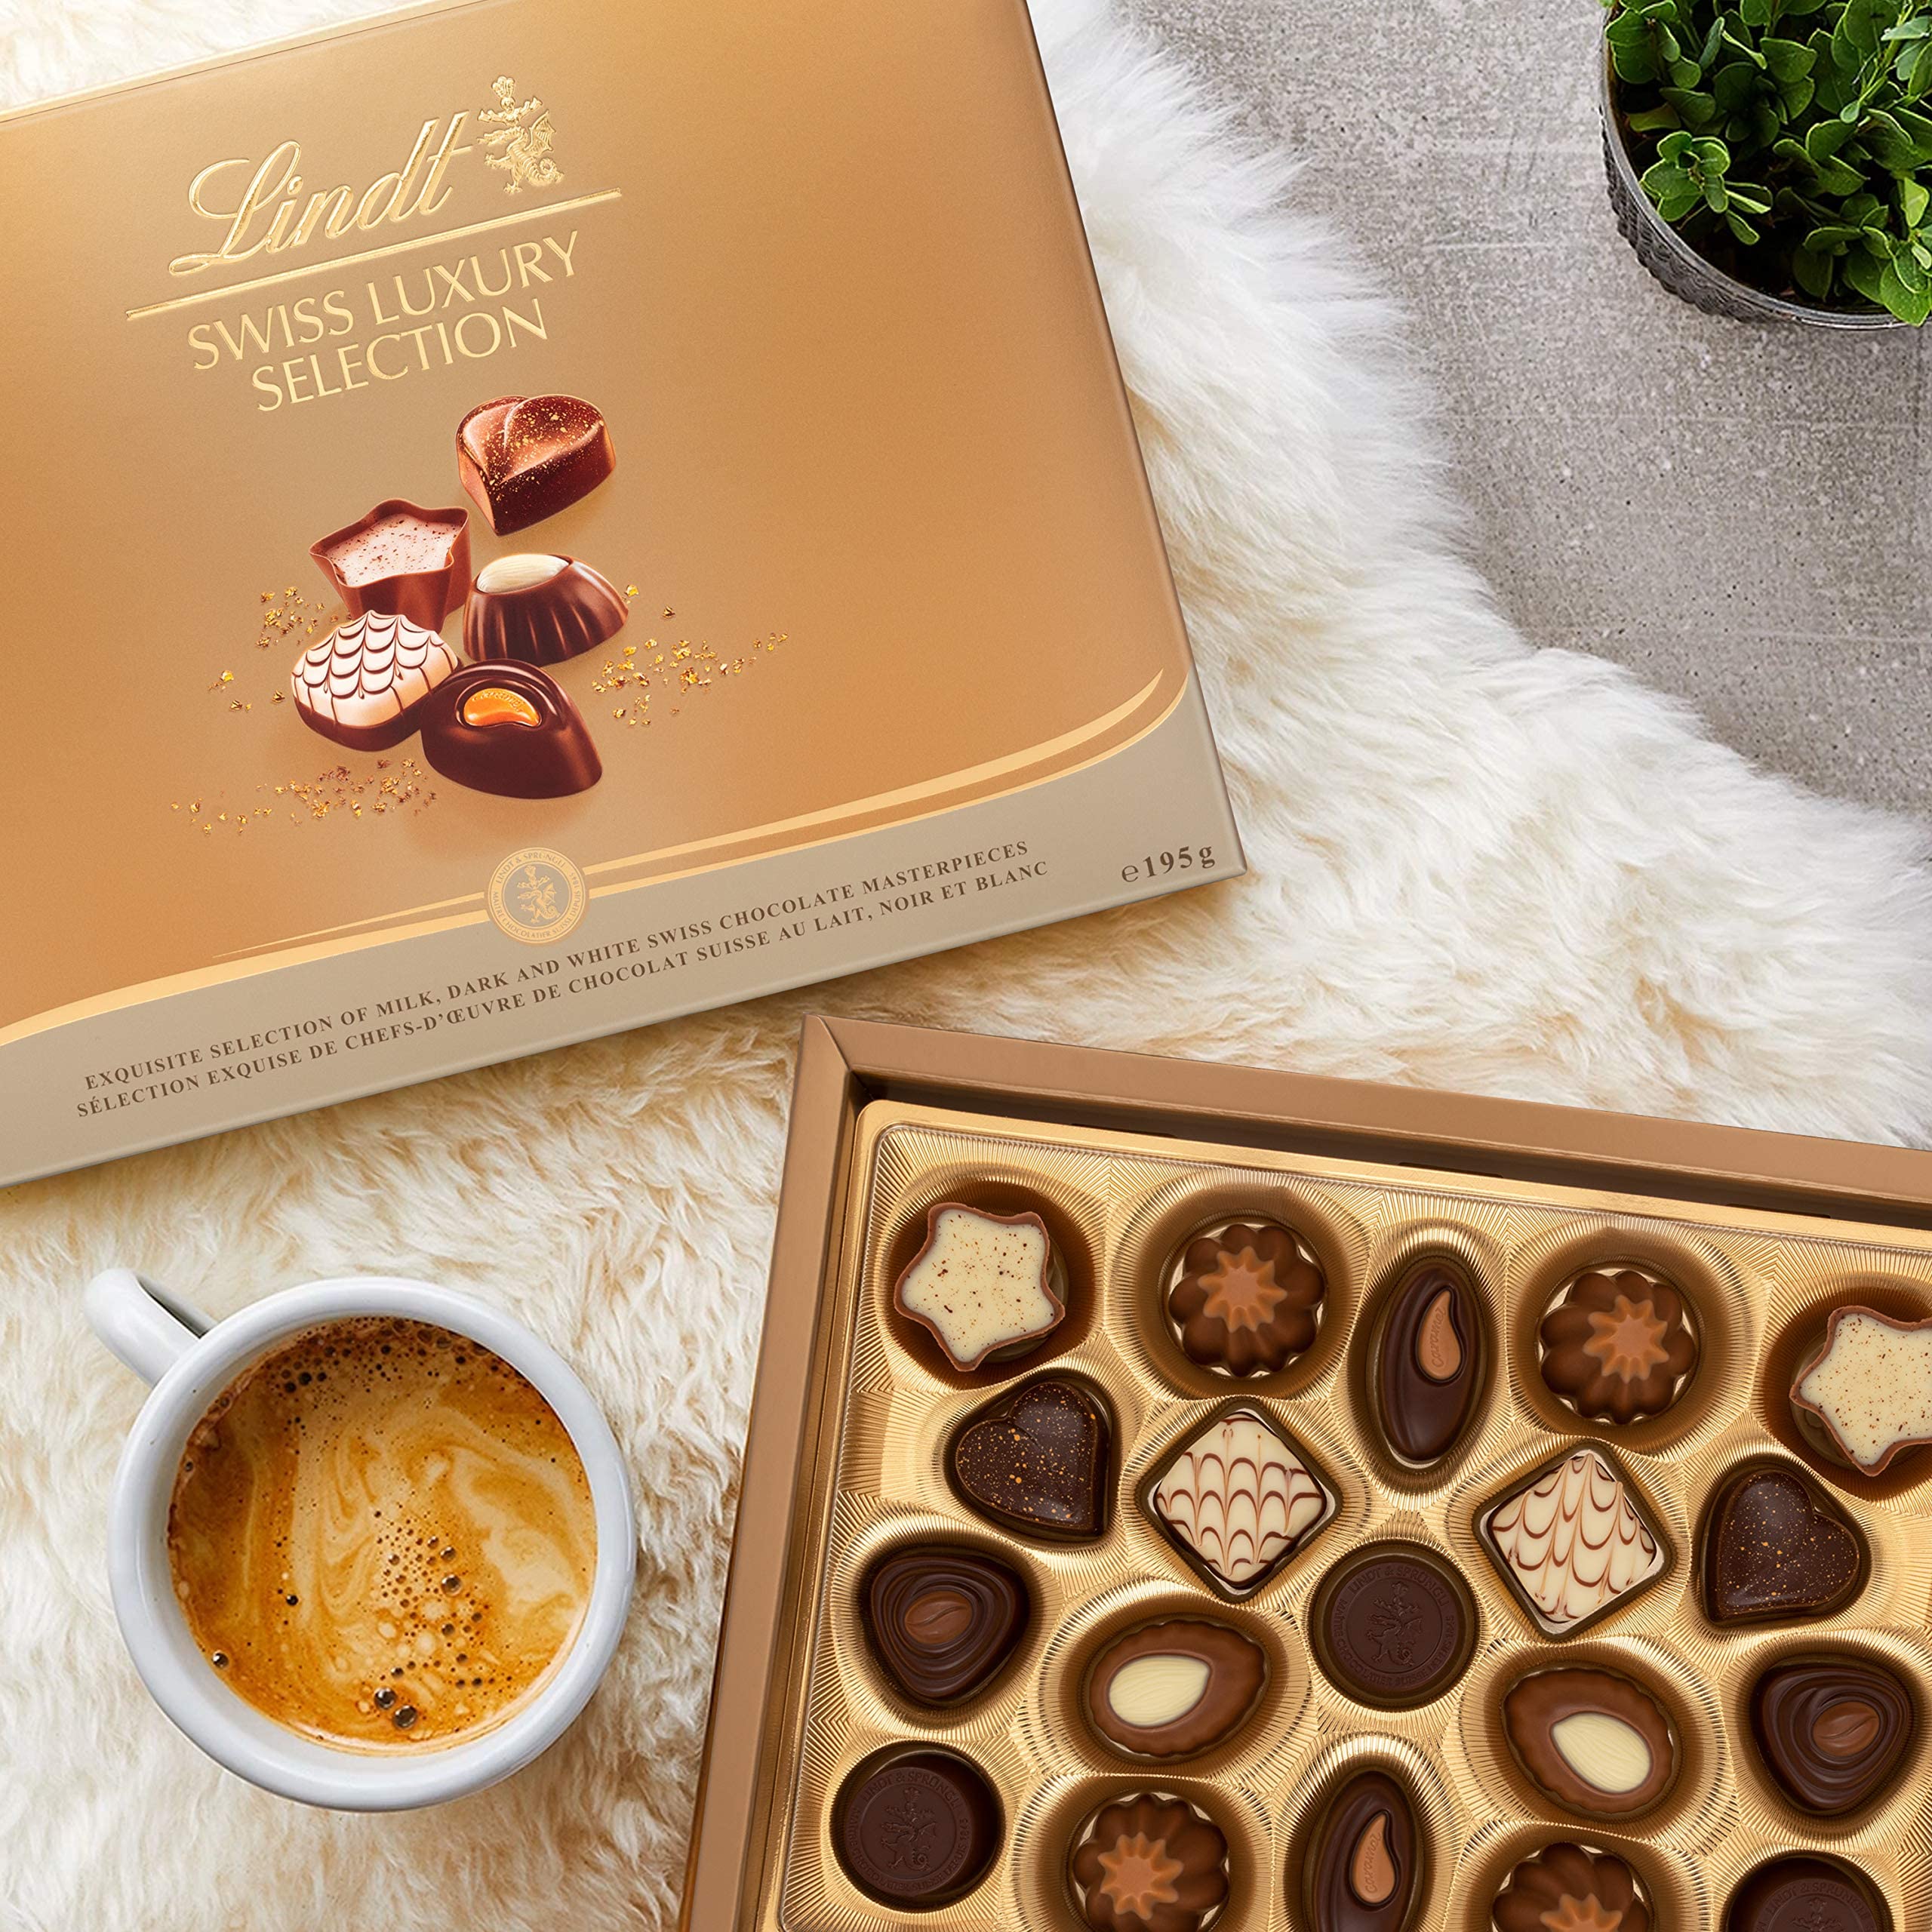 Lindt Swiss Luxury Finest Selection of Dark, Milk and White Chocolate Pralines (195g)